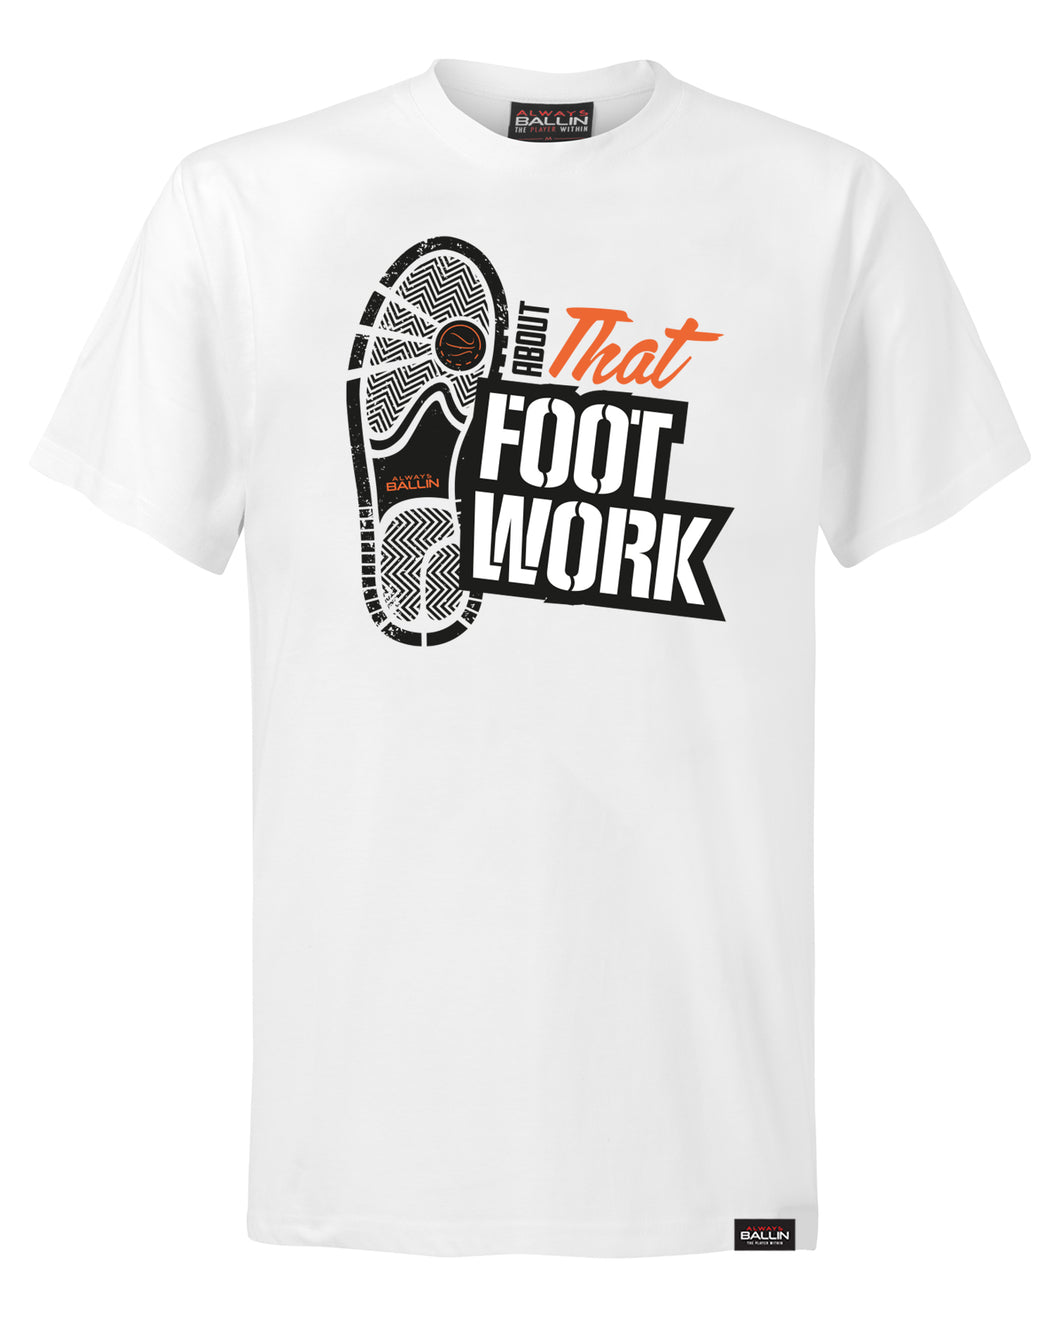 About That Footwork Mens T-Shirt